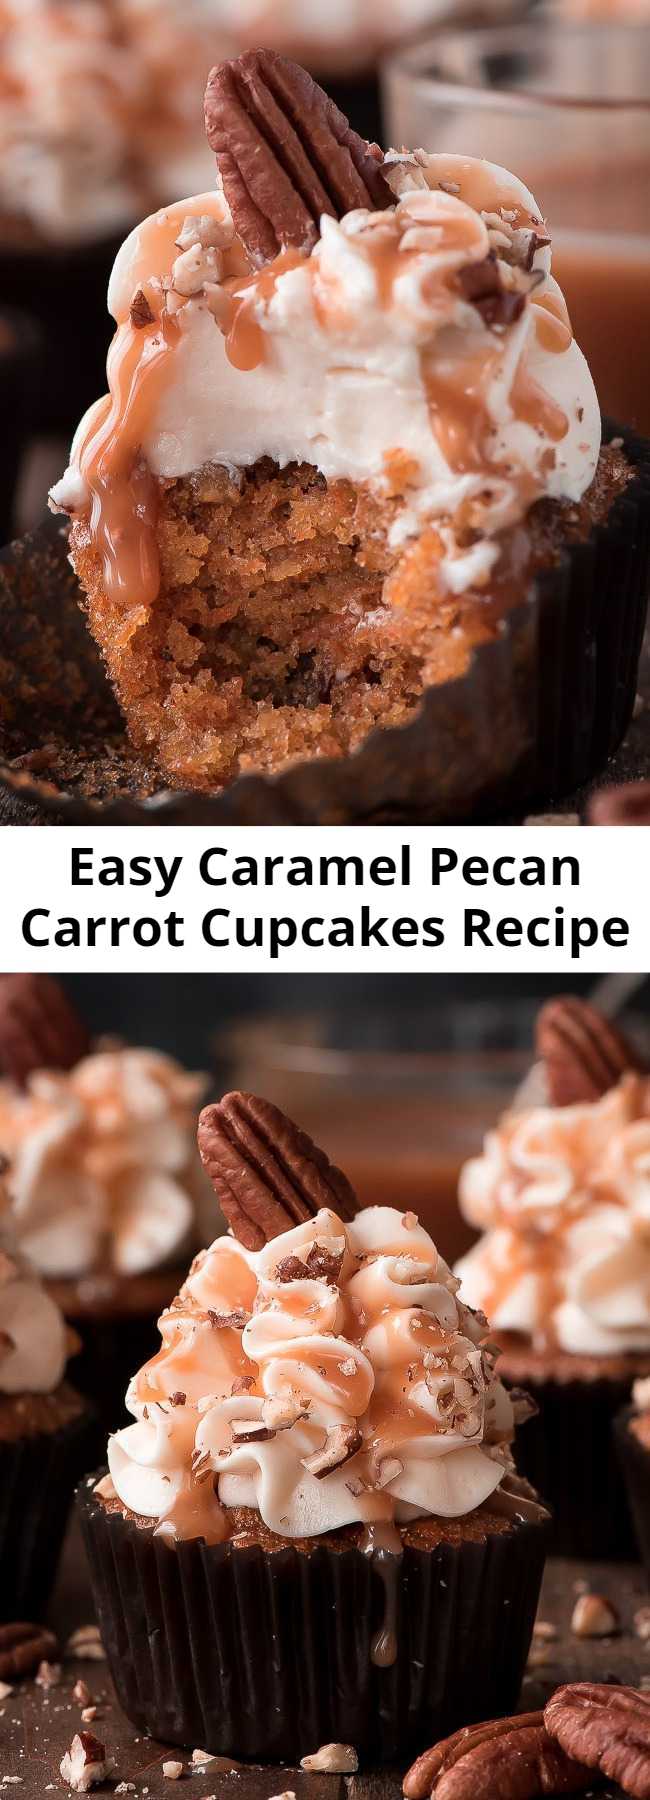 Easy Caramel Pecan Carrot Cupcakes Recipe - With a super moist cake and silky smooth cream cheese frosting, CARAMEL PECAN CARROT CUPCAKES are more than a dream come true.